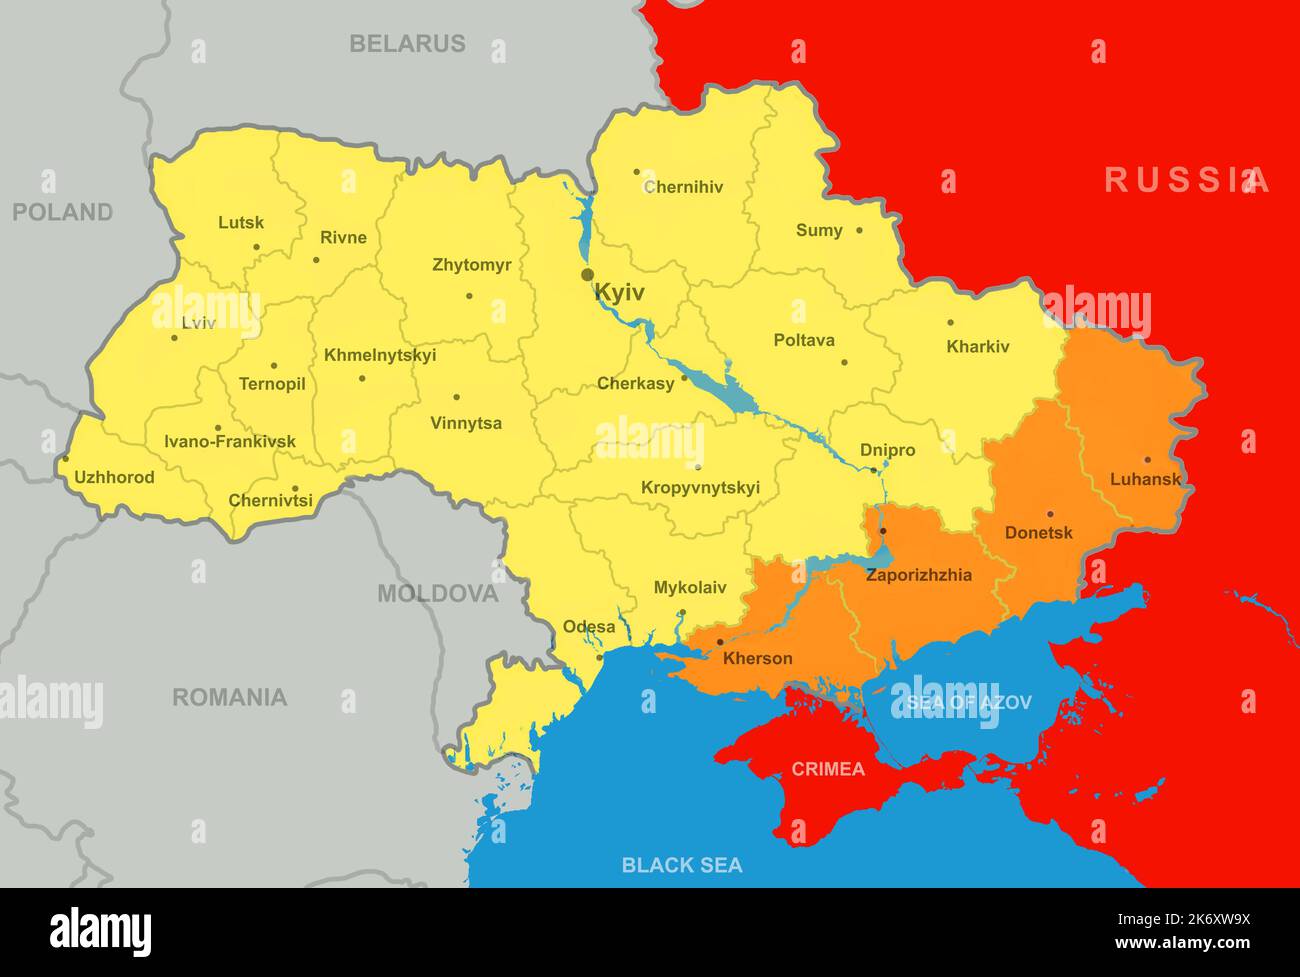 Ukraine map after referendums in Donetsk, Luhansk, Kherson and Zaporizhzhia regions. They became part of Russia in 2022 due to Russian-Ukrainian war. Stock Photo